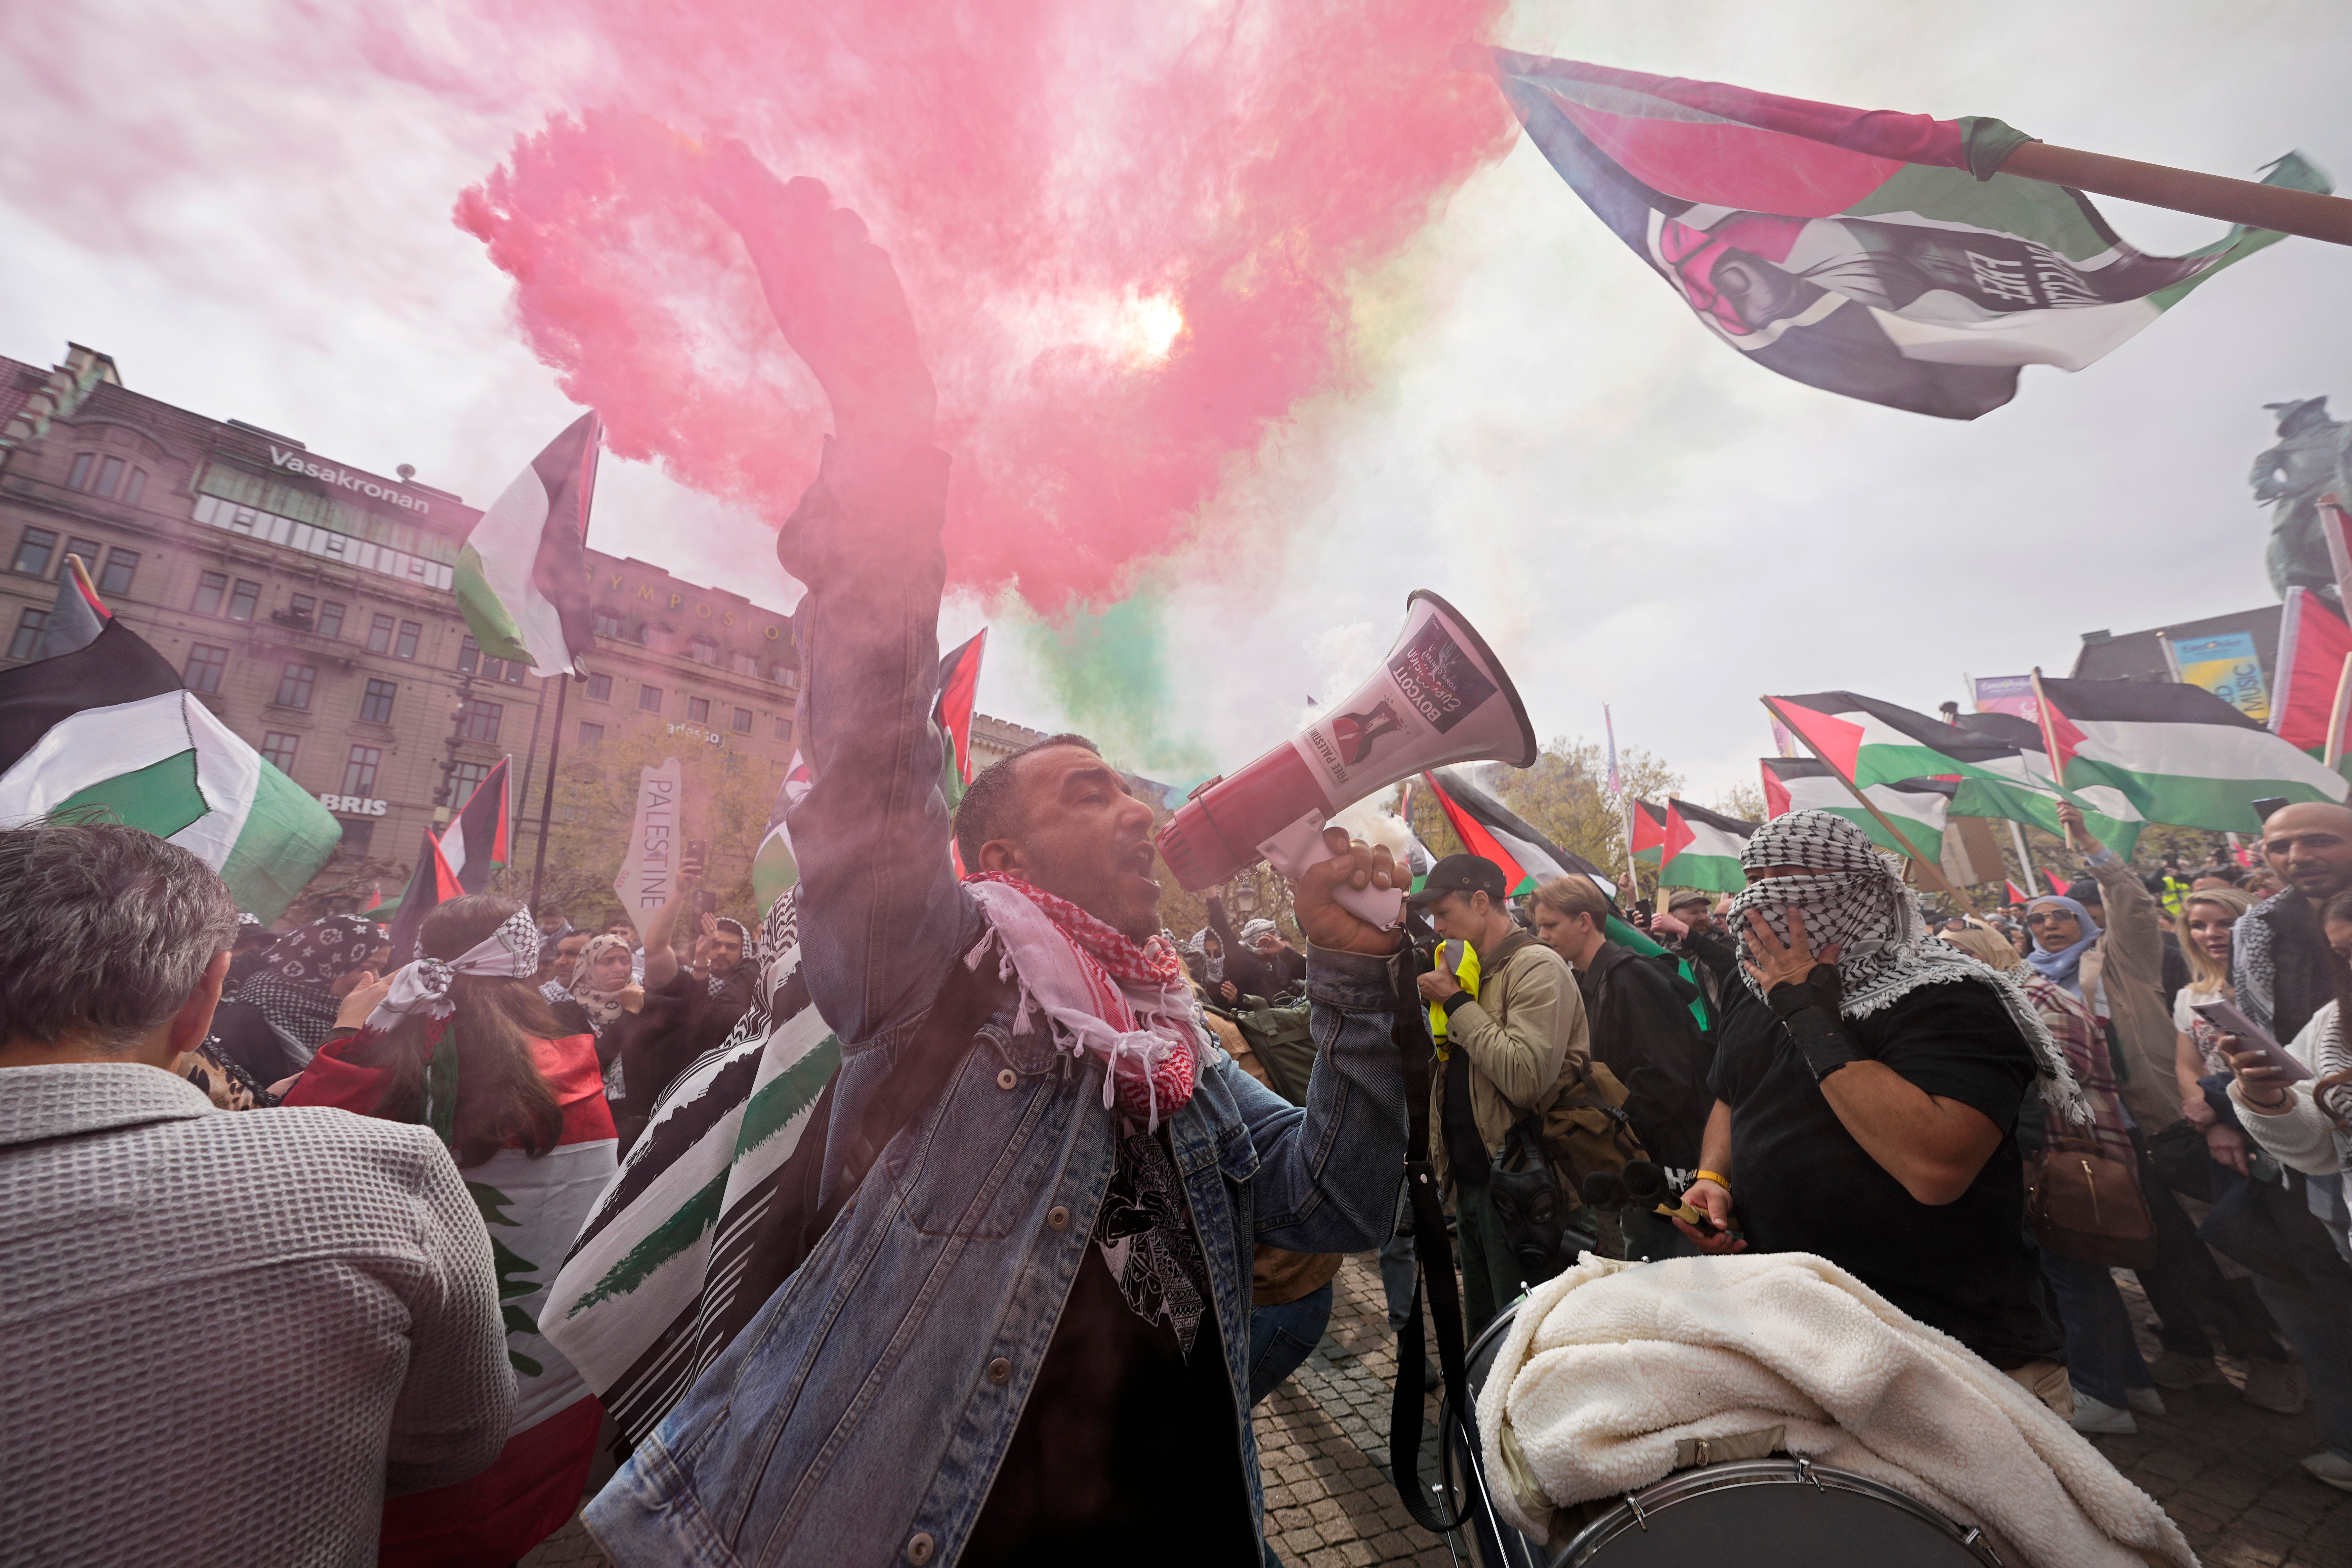 A protestor shouts through a megaphone as smoke canisters in the colours of the Palestinian flag are set off during pro-Palestine protests in Malmo, Sweden